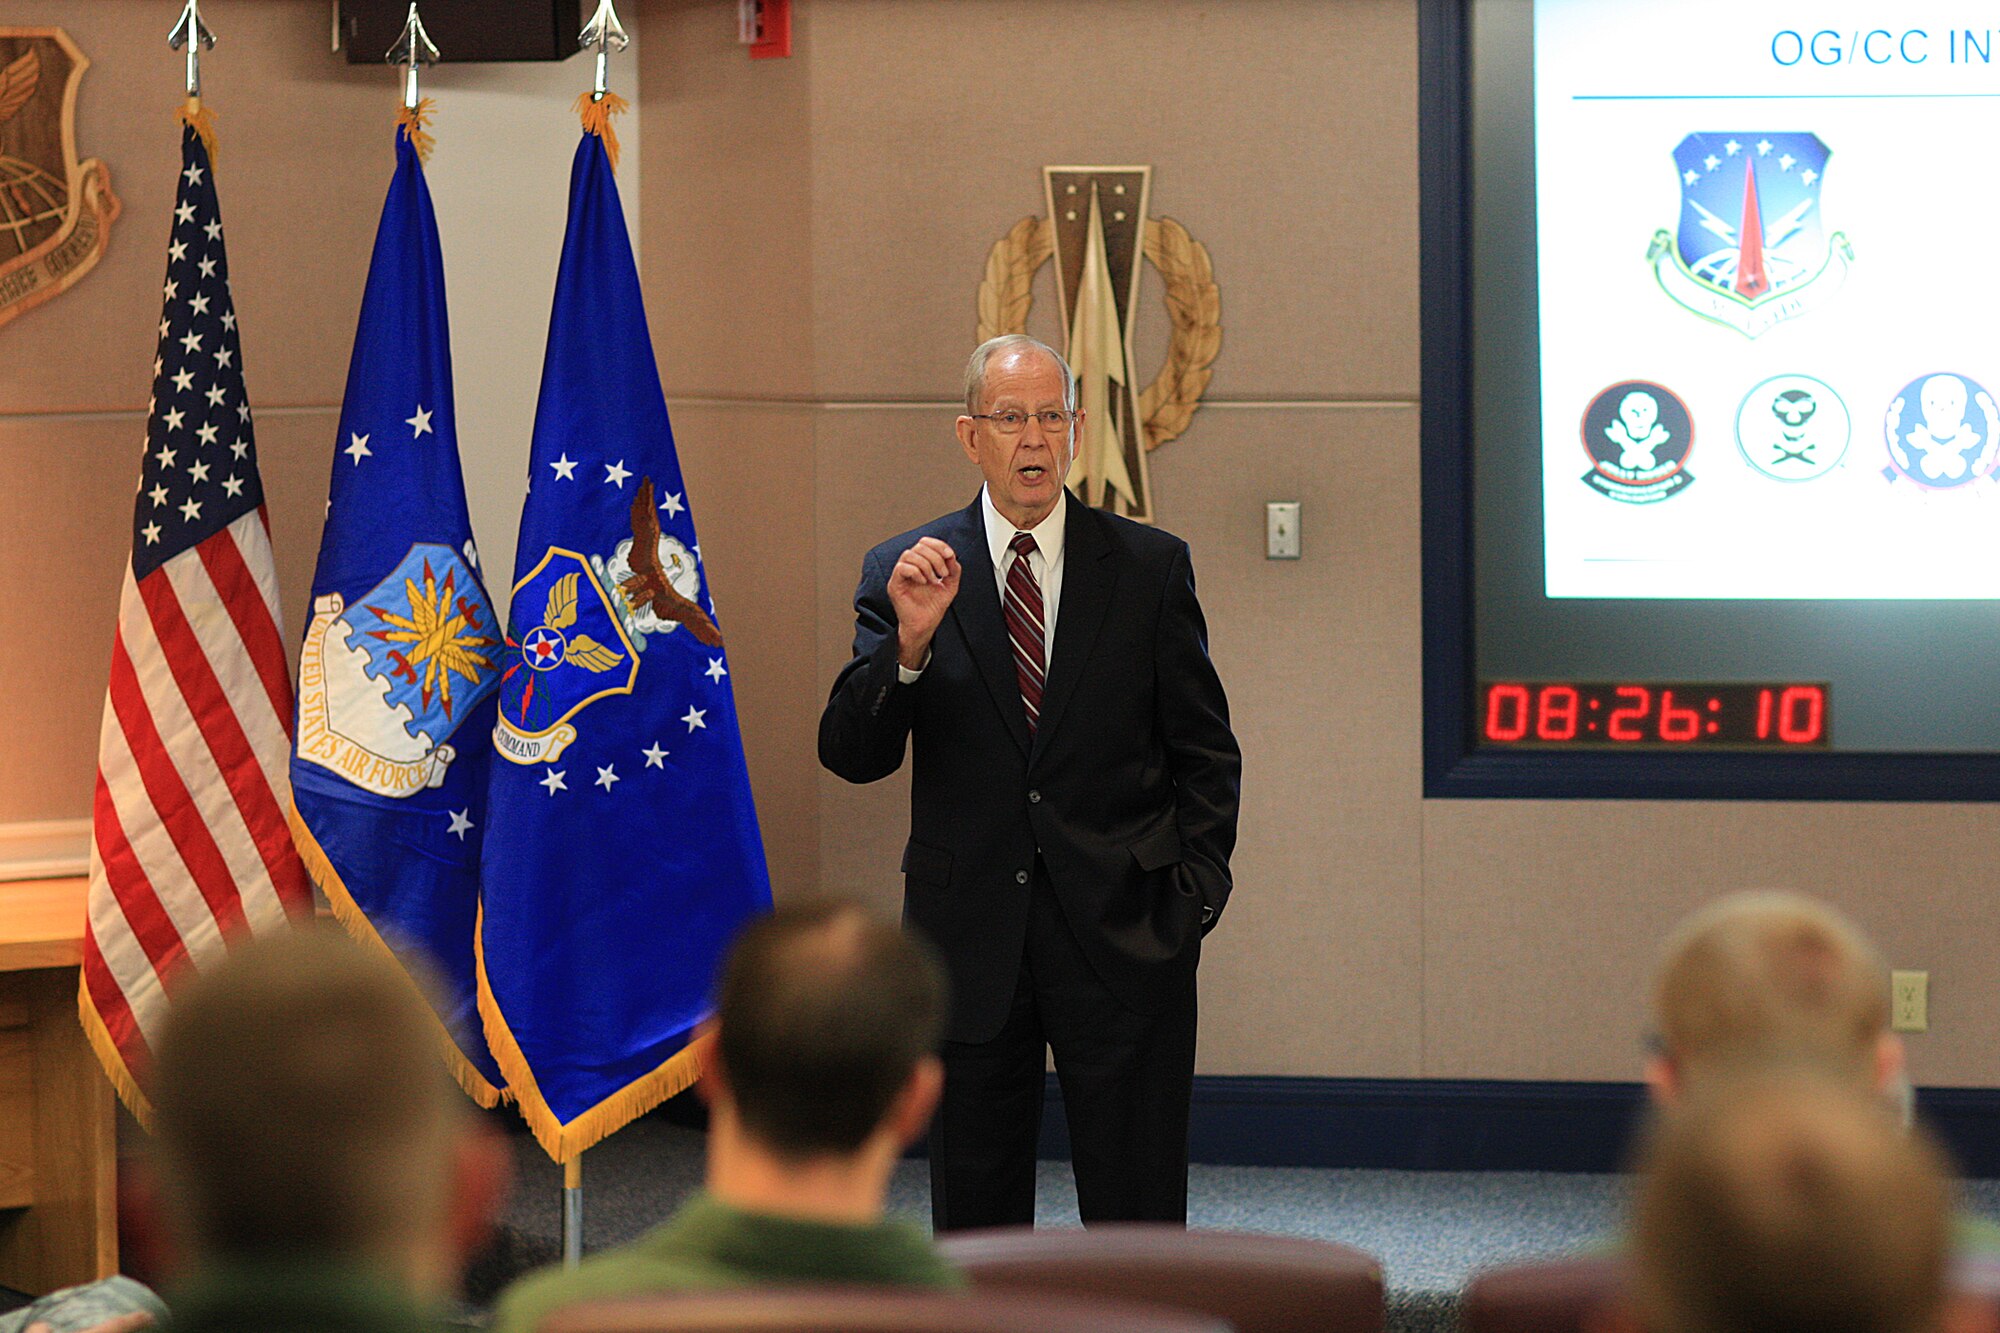 Retired Gen. Larry Welch, former Air Force Chief of Staff, speaks during a 90th Operations Group mass briefing in the 90th OG building during the Defense Science Board visit Sept. 20. (U.S. Air Force photo by Matt Bilden)